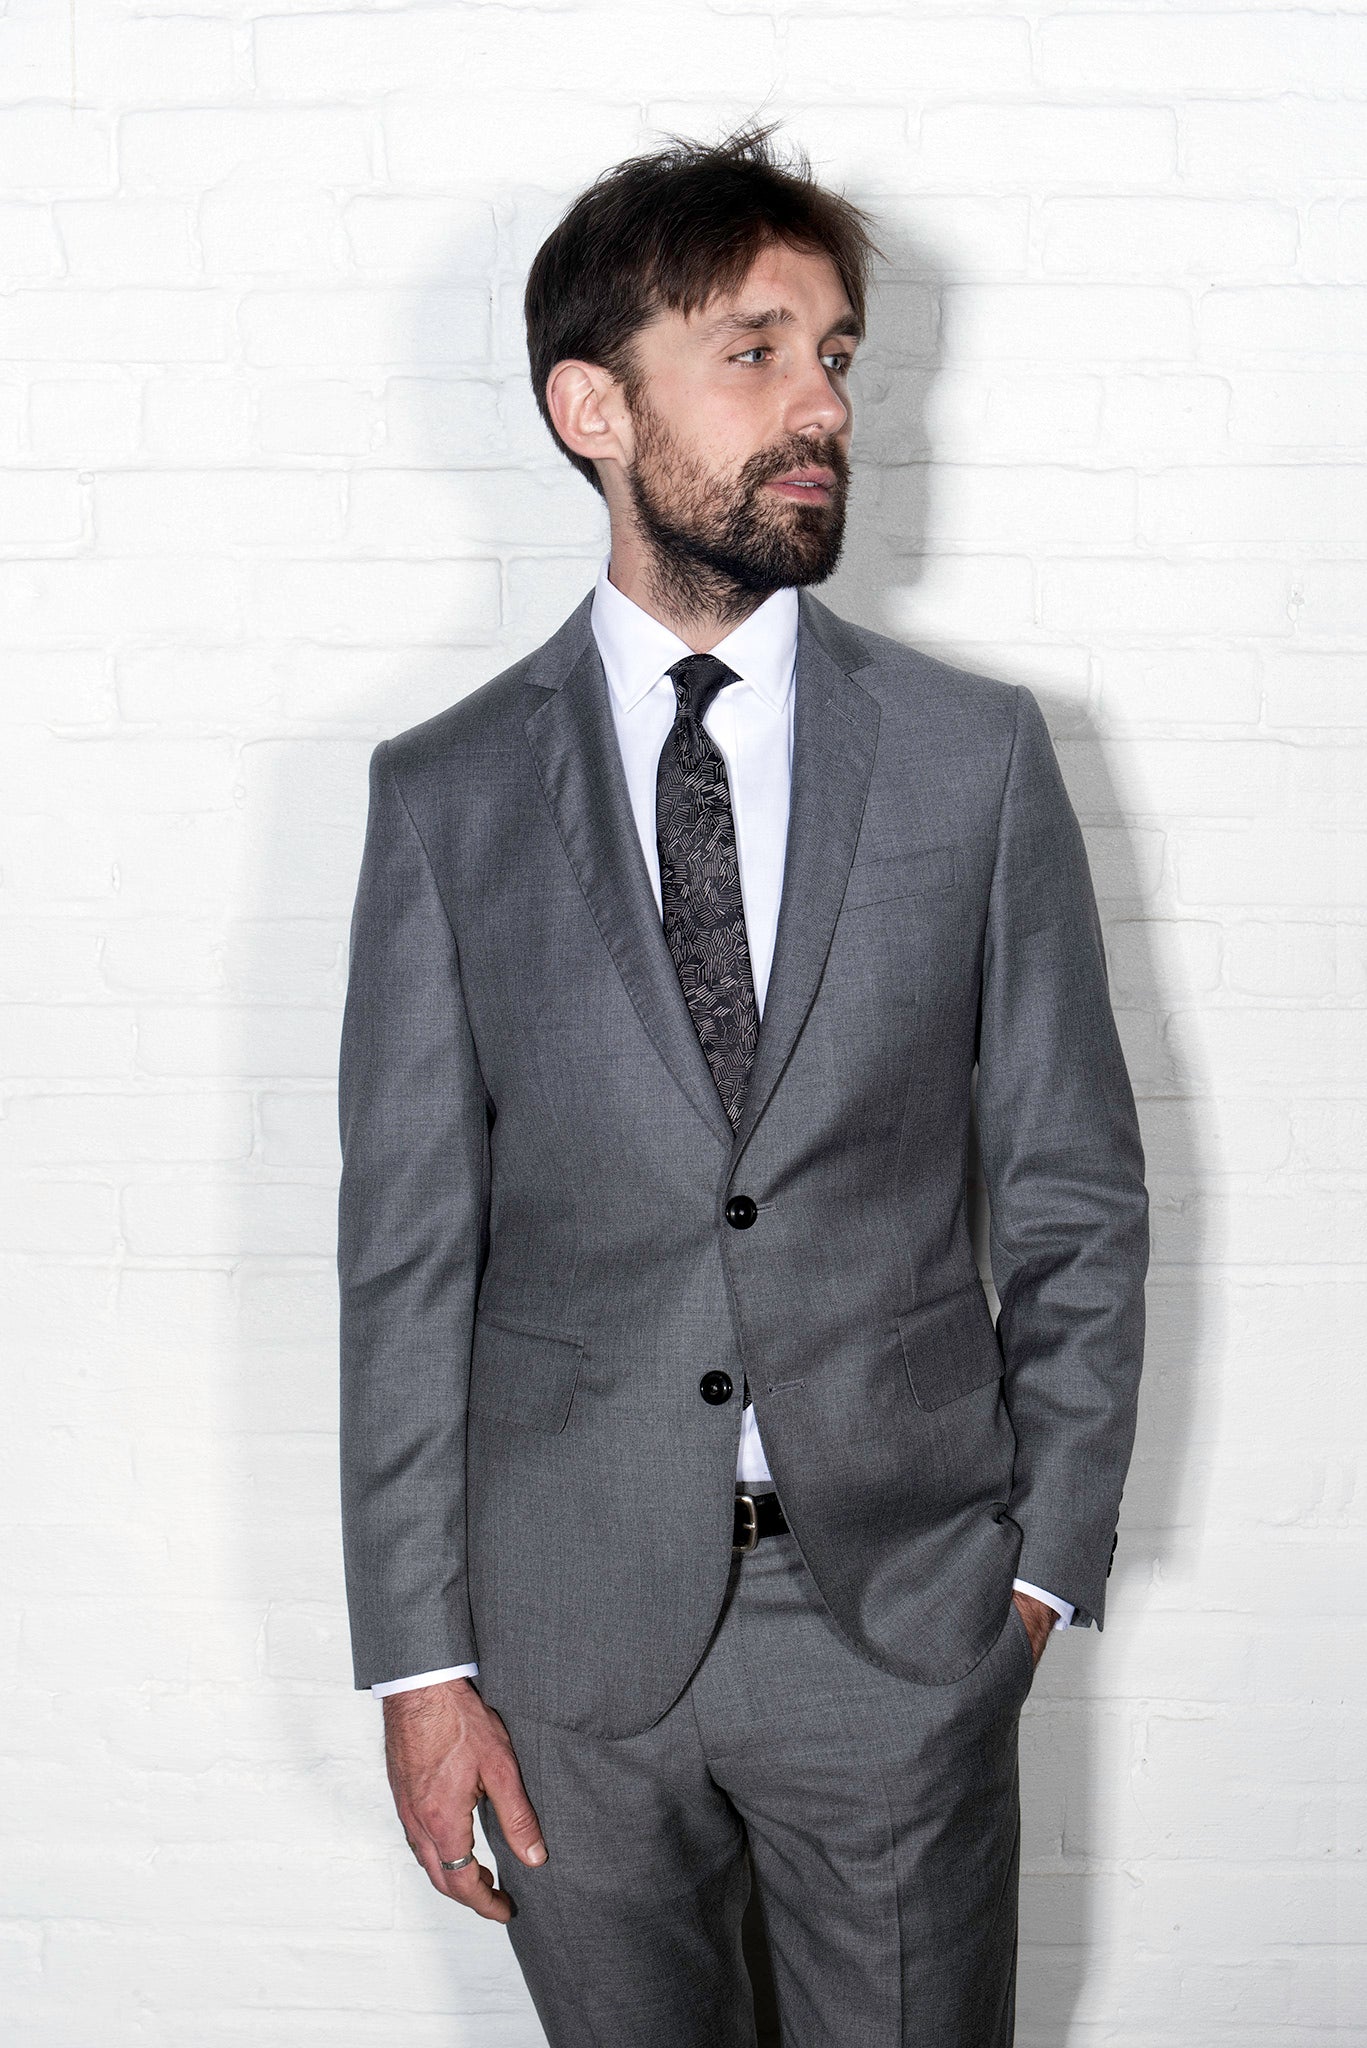 BKT50 Tailored Jacket in Super 110s Twill - Dove Gray